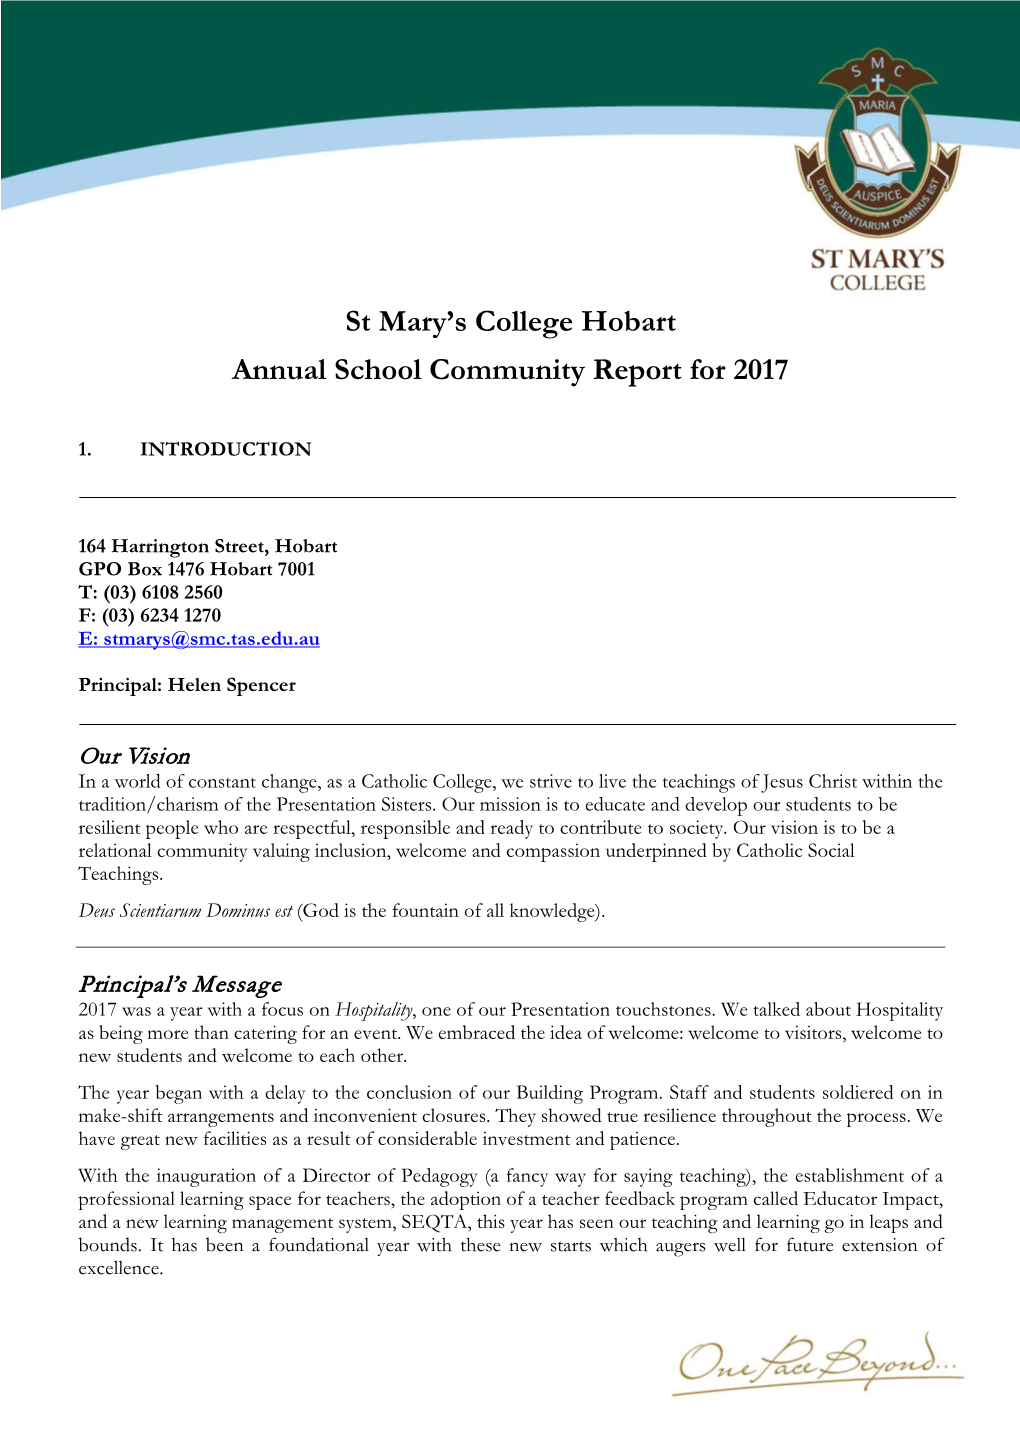 St Mary's College Hobart Annual School Community Report for 2017